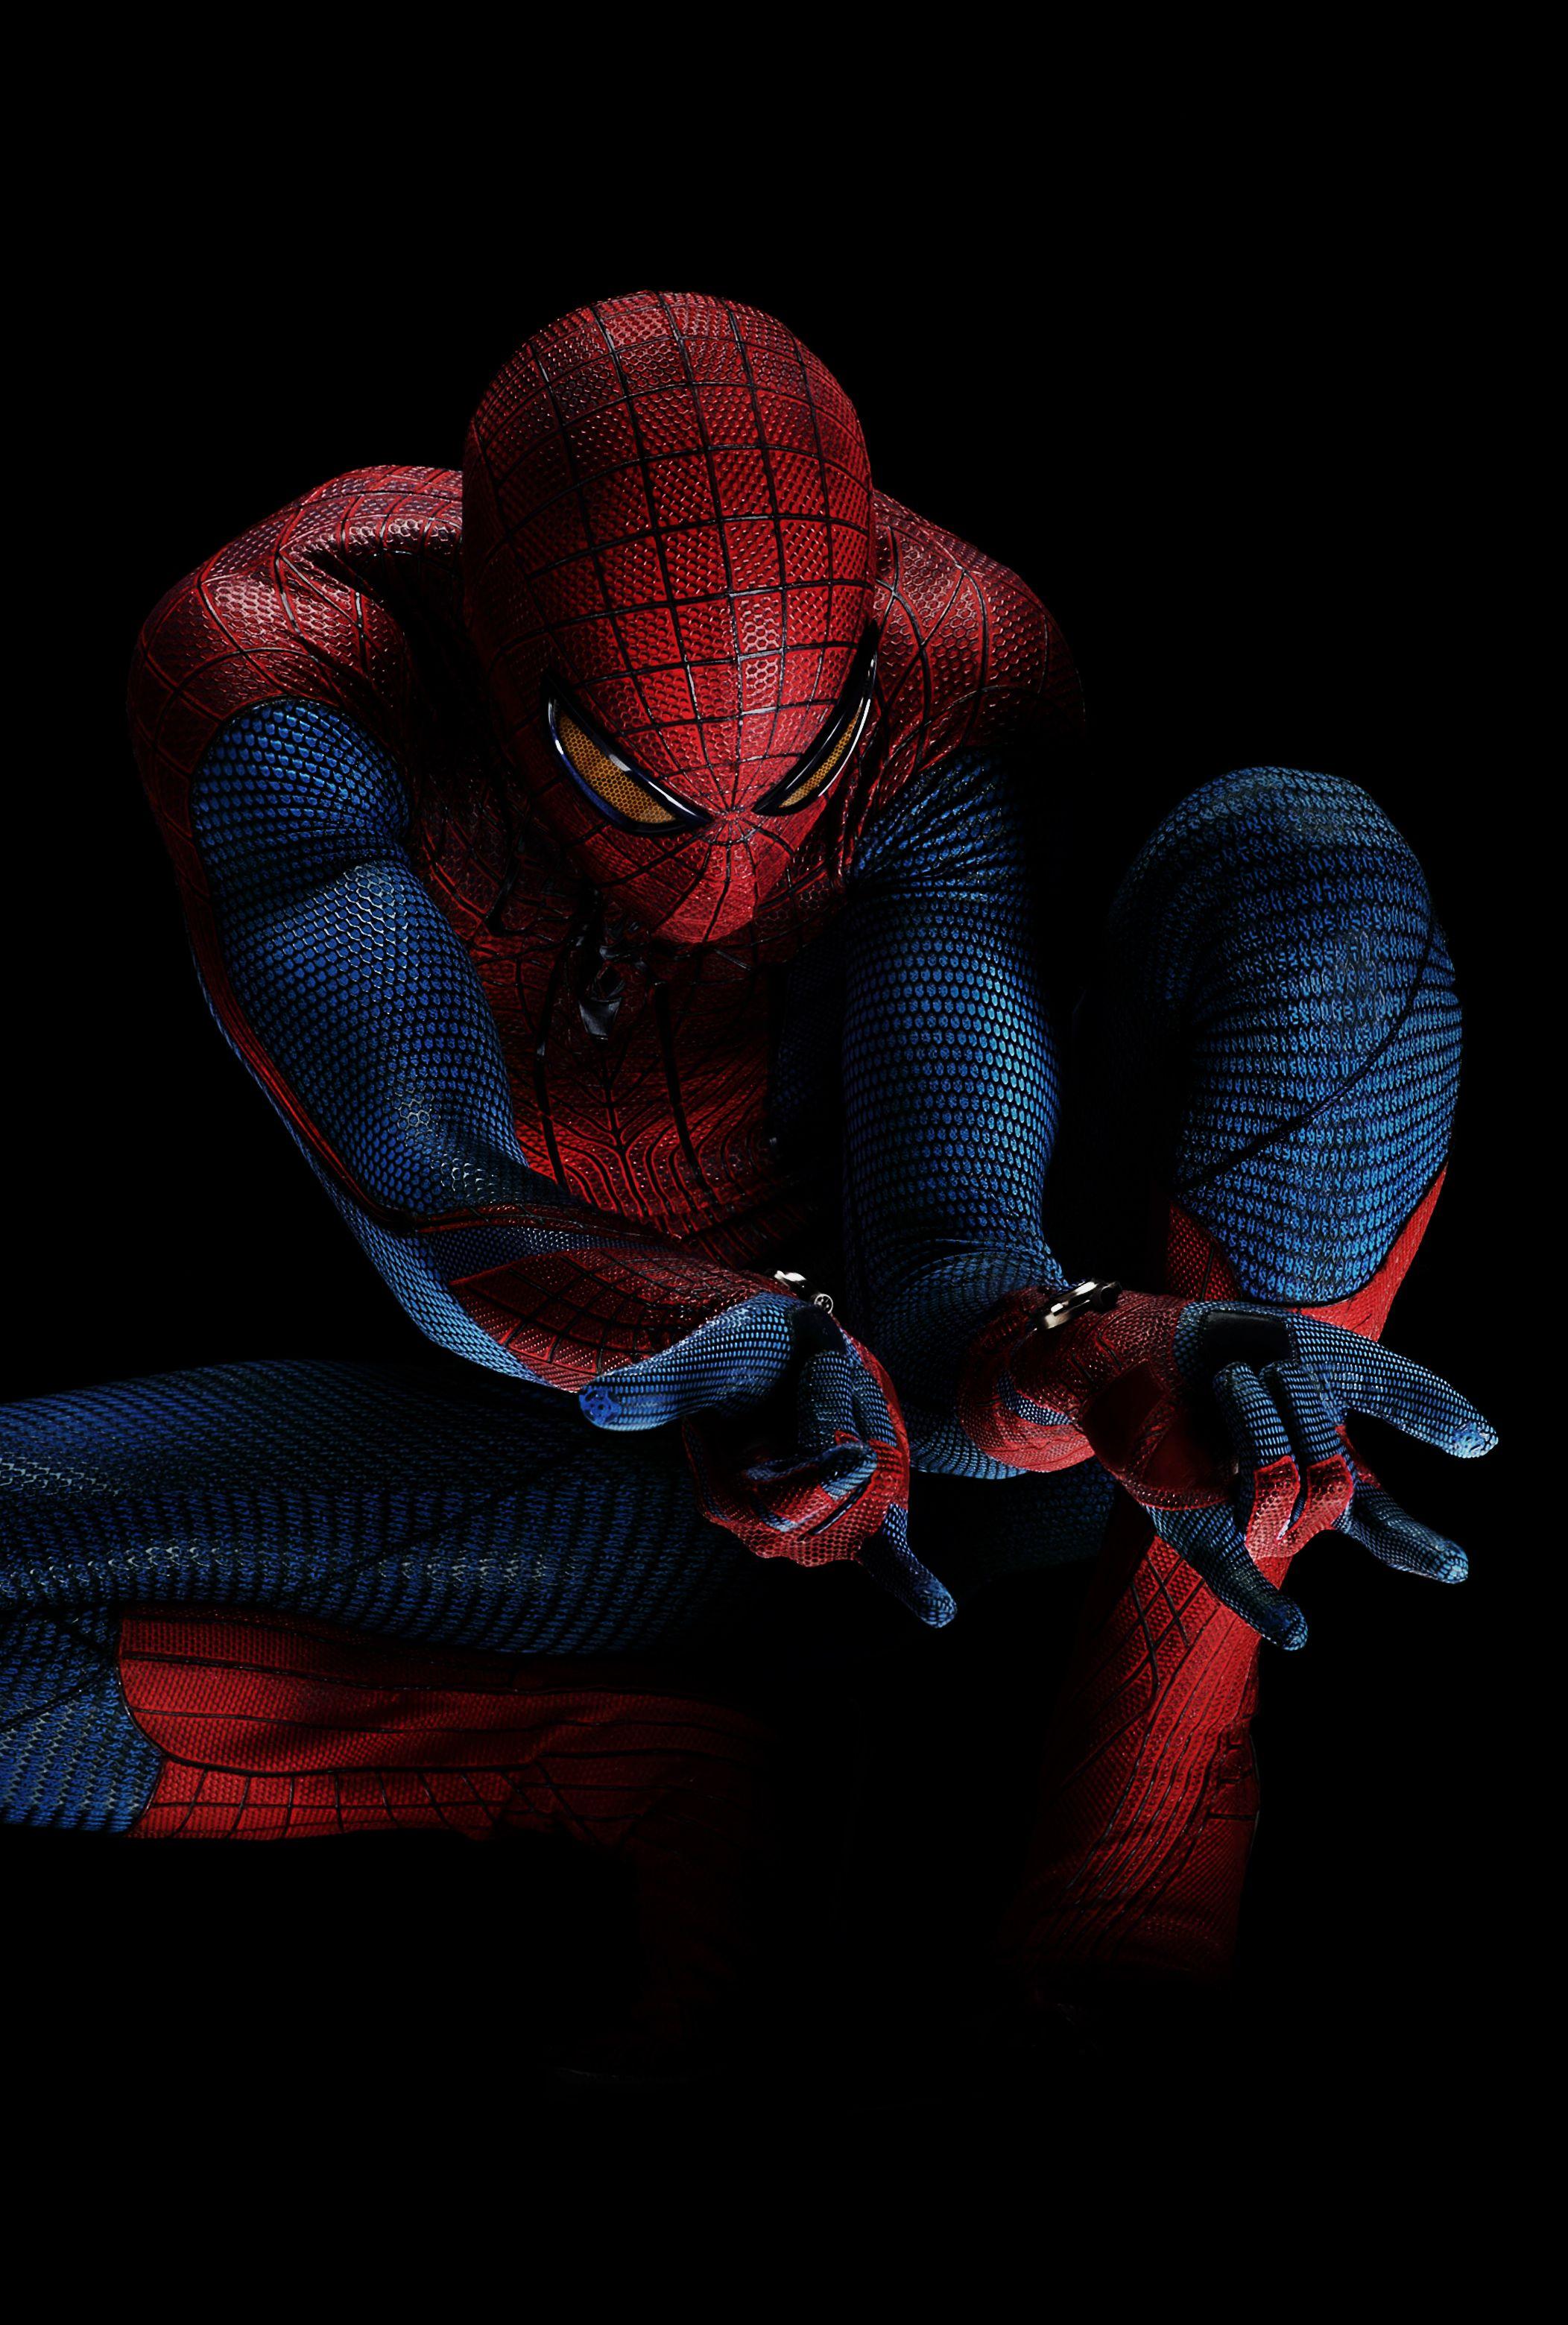 THE AMAZING SPIDER MAN Image Gallery